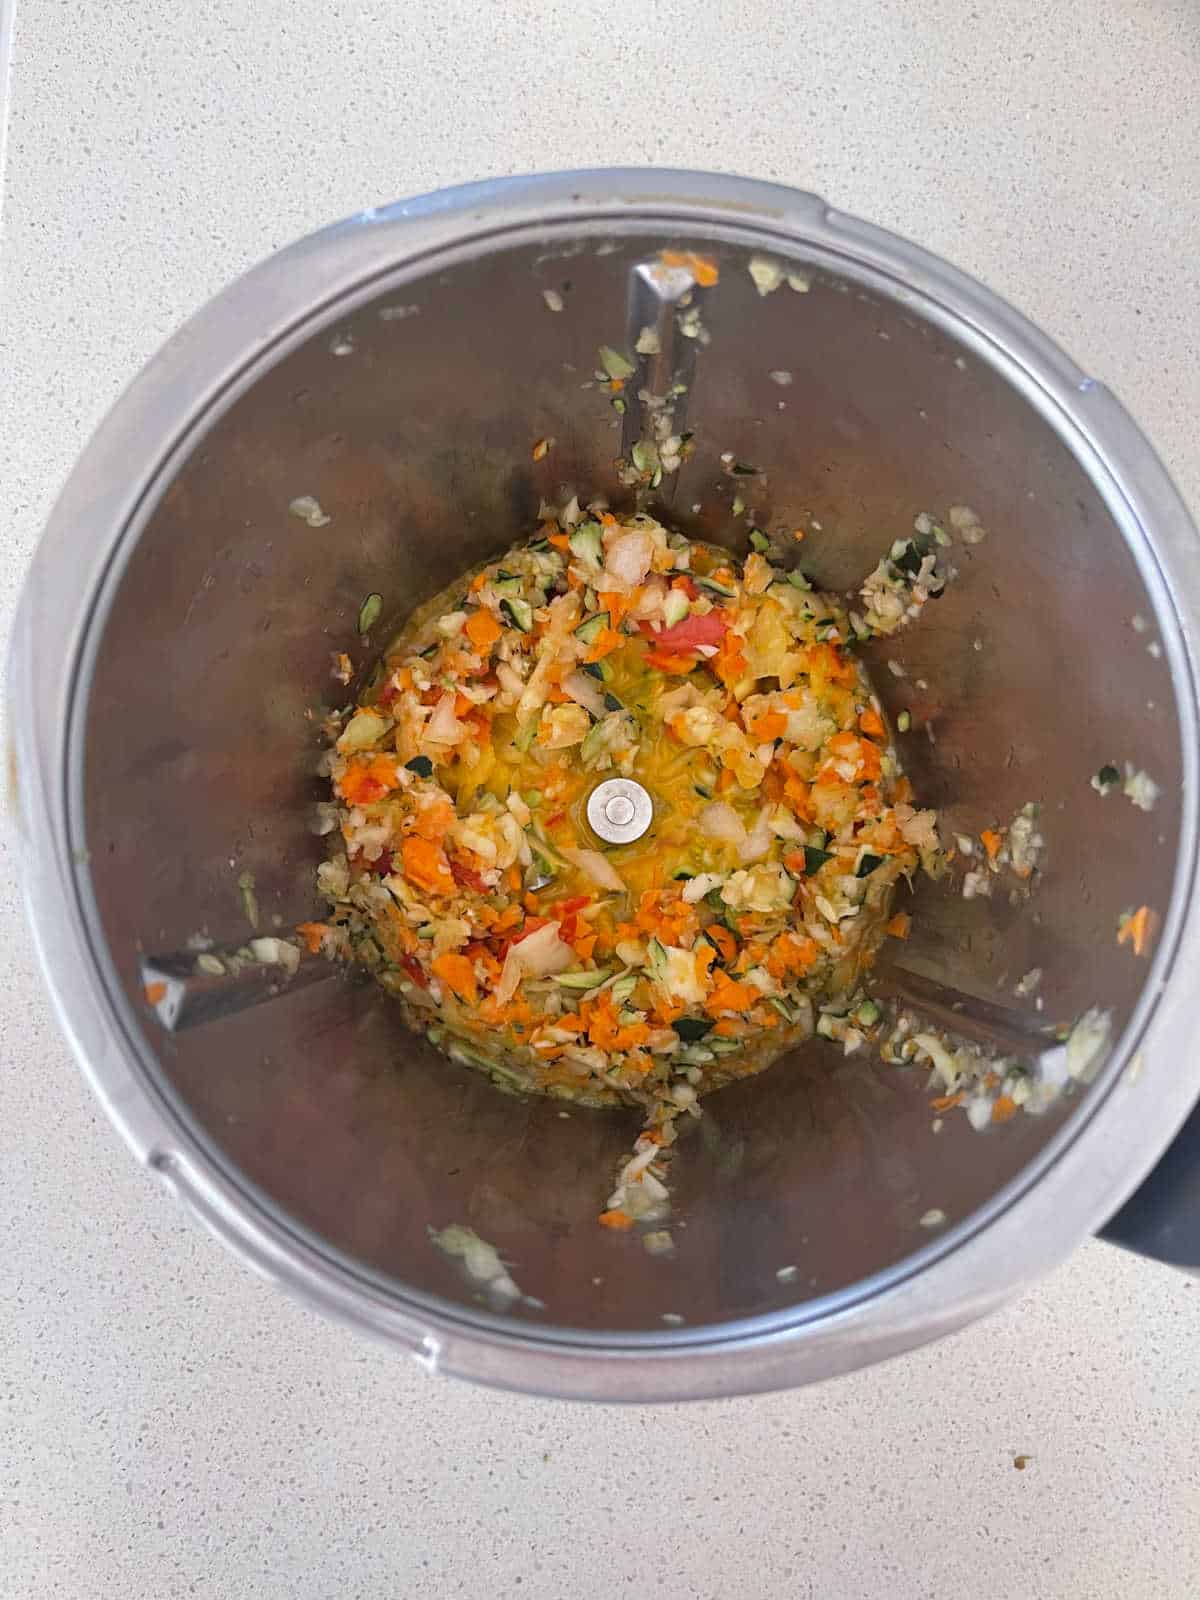 Cooked grated vegetable in a Thermomix bowl.